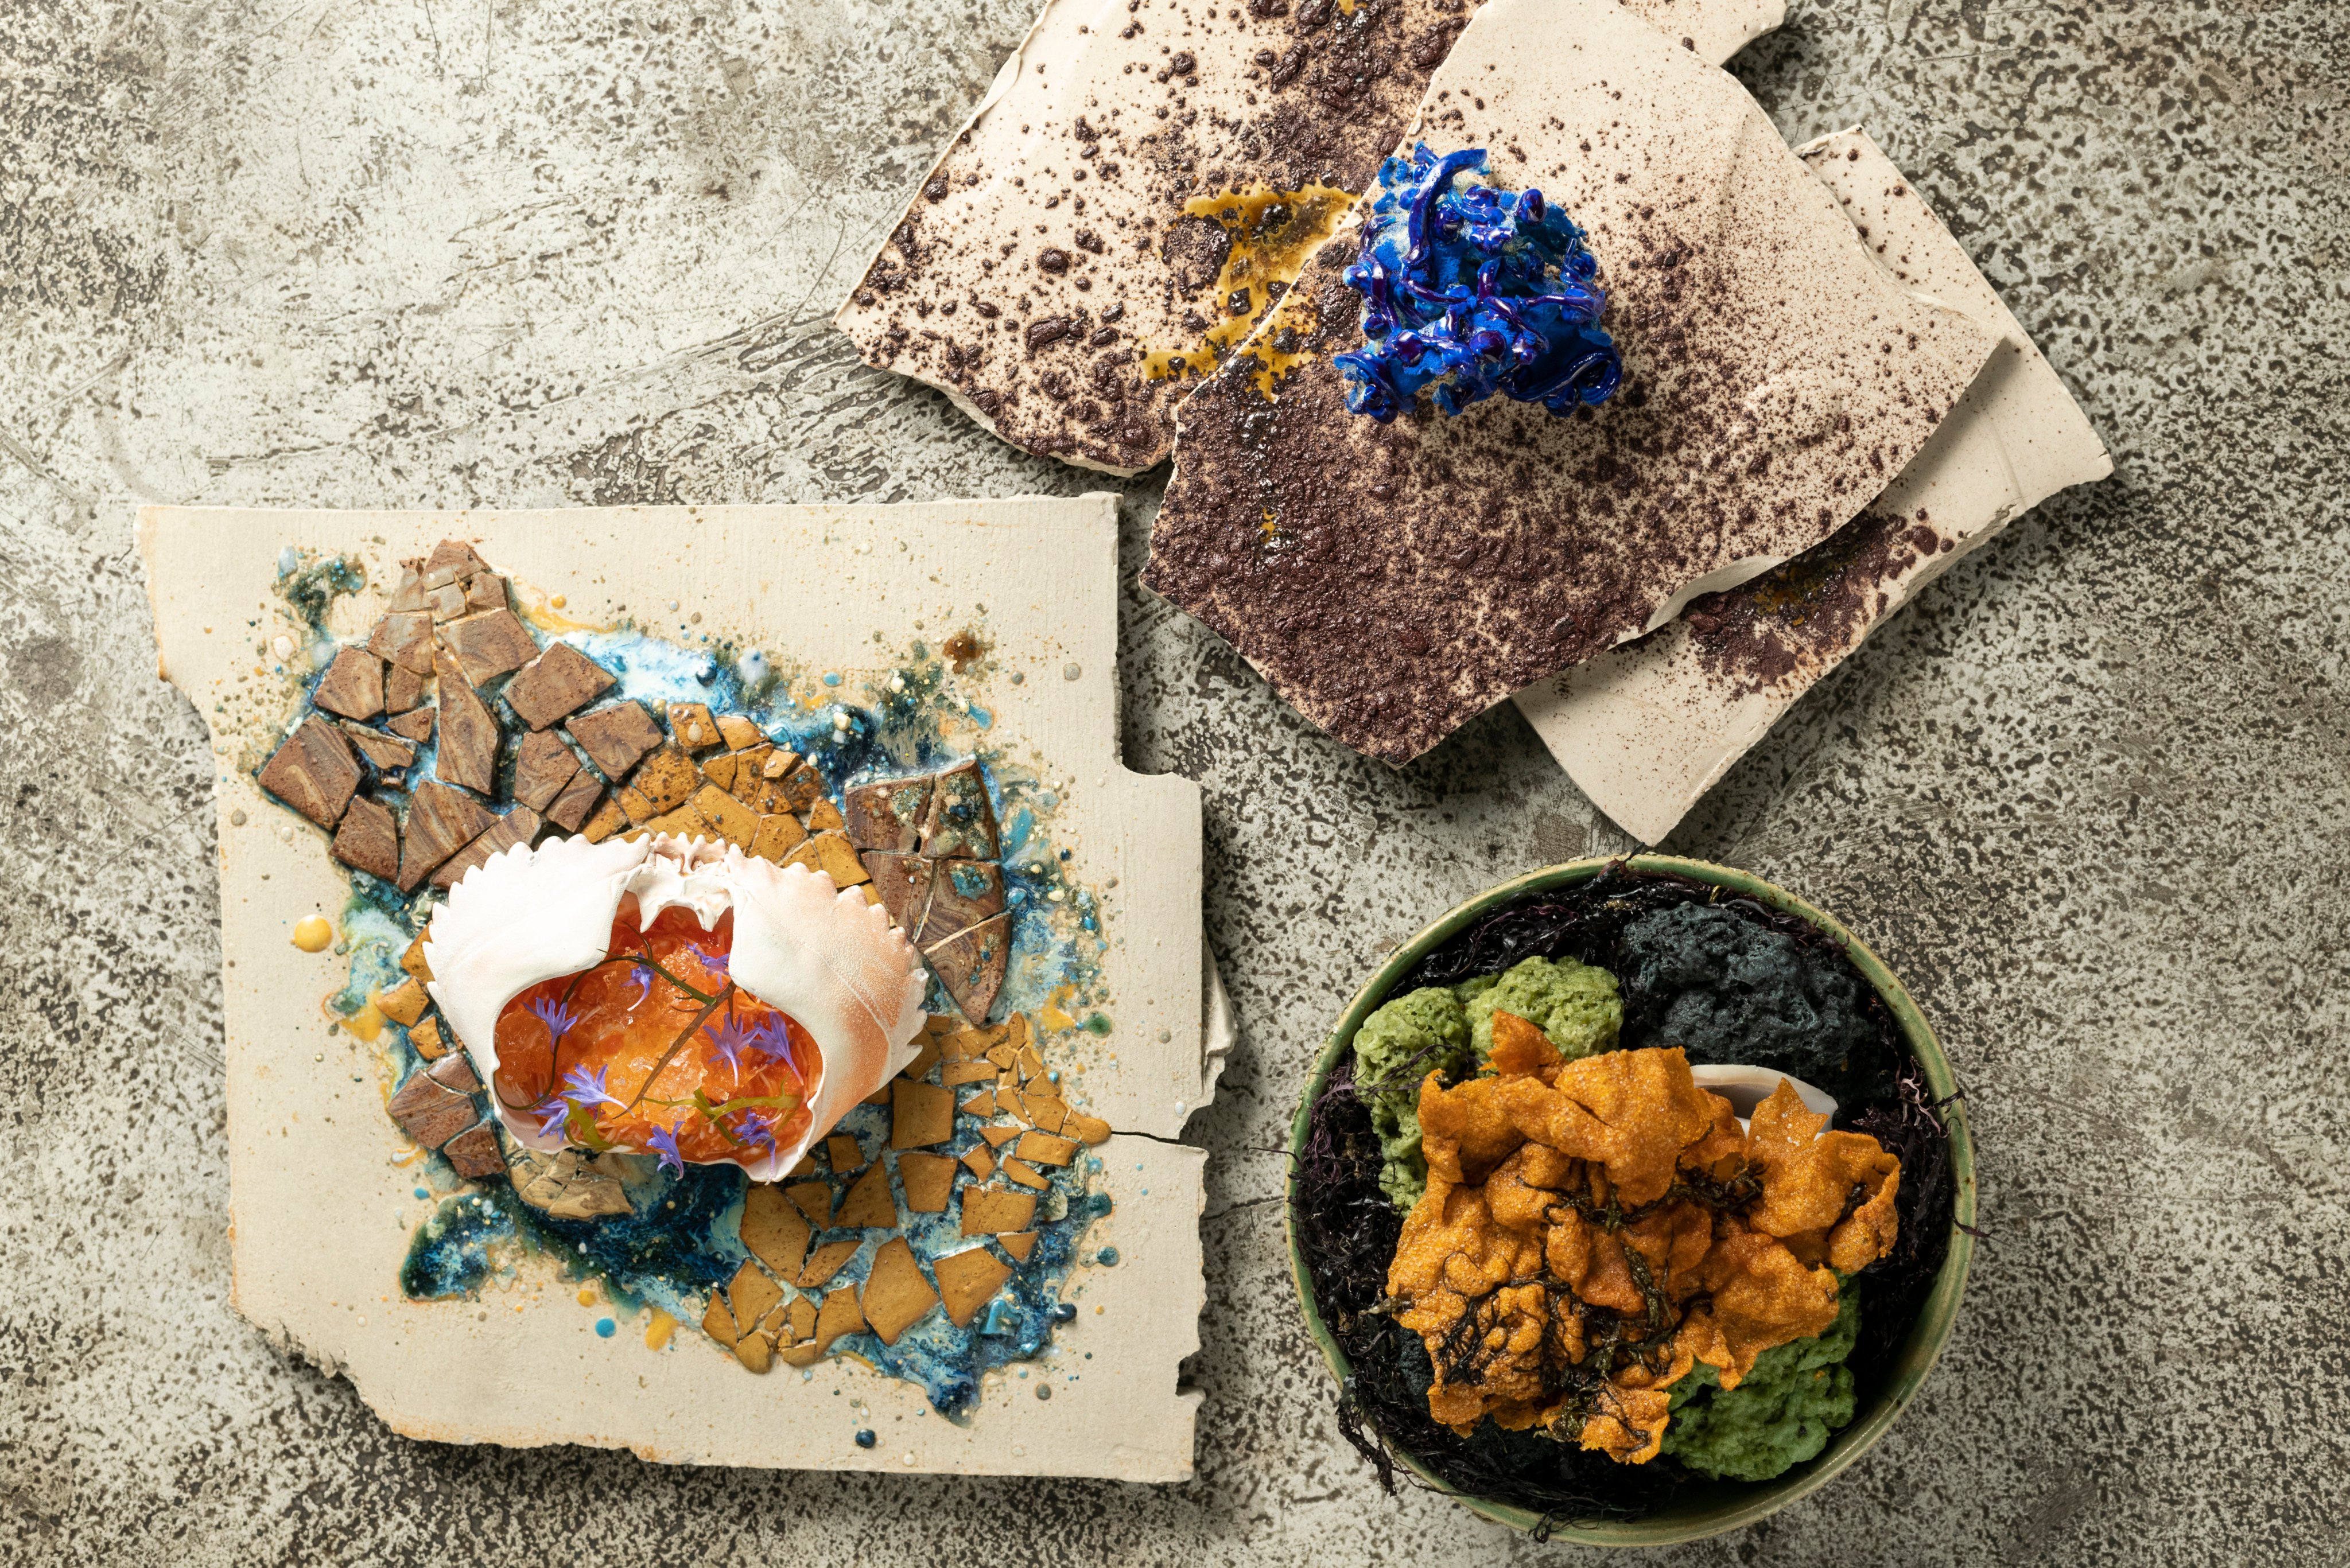 “Black Rocks” is a course at Central restaurant in Lima, No 1 on the 2022 World’s 50 Best Restaurants lists, that features ingredients sourced from the sea. Credit: Central